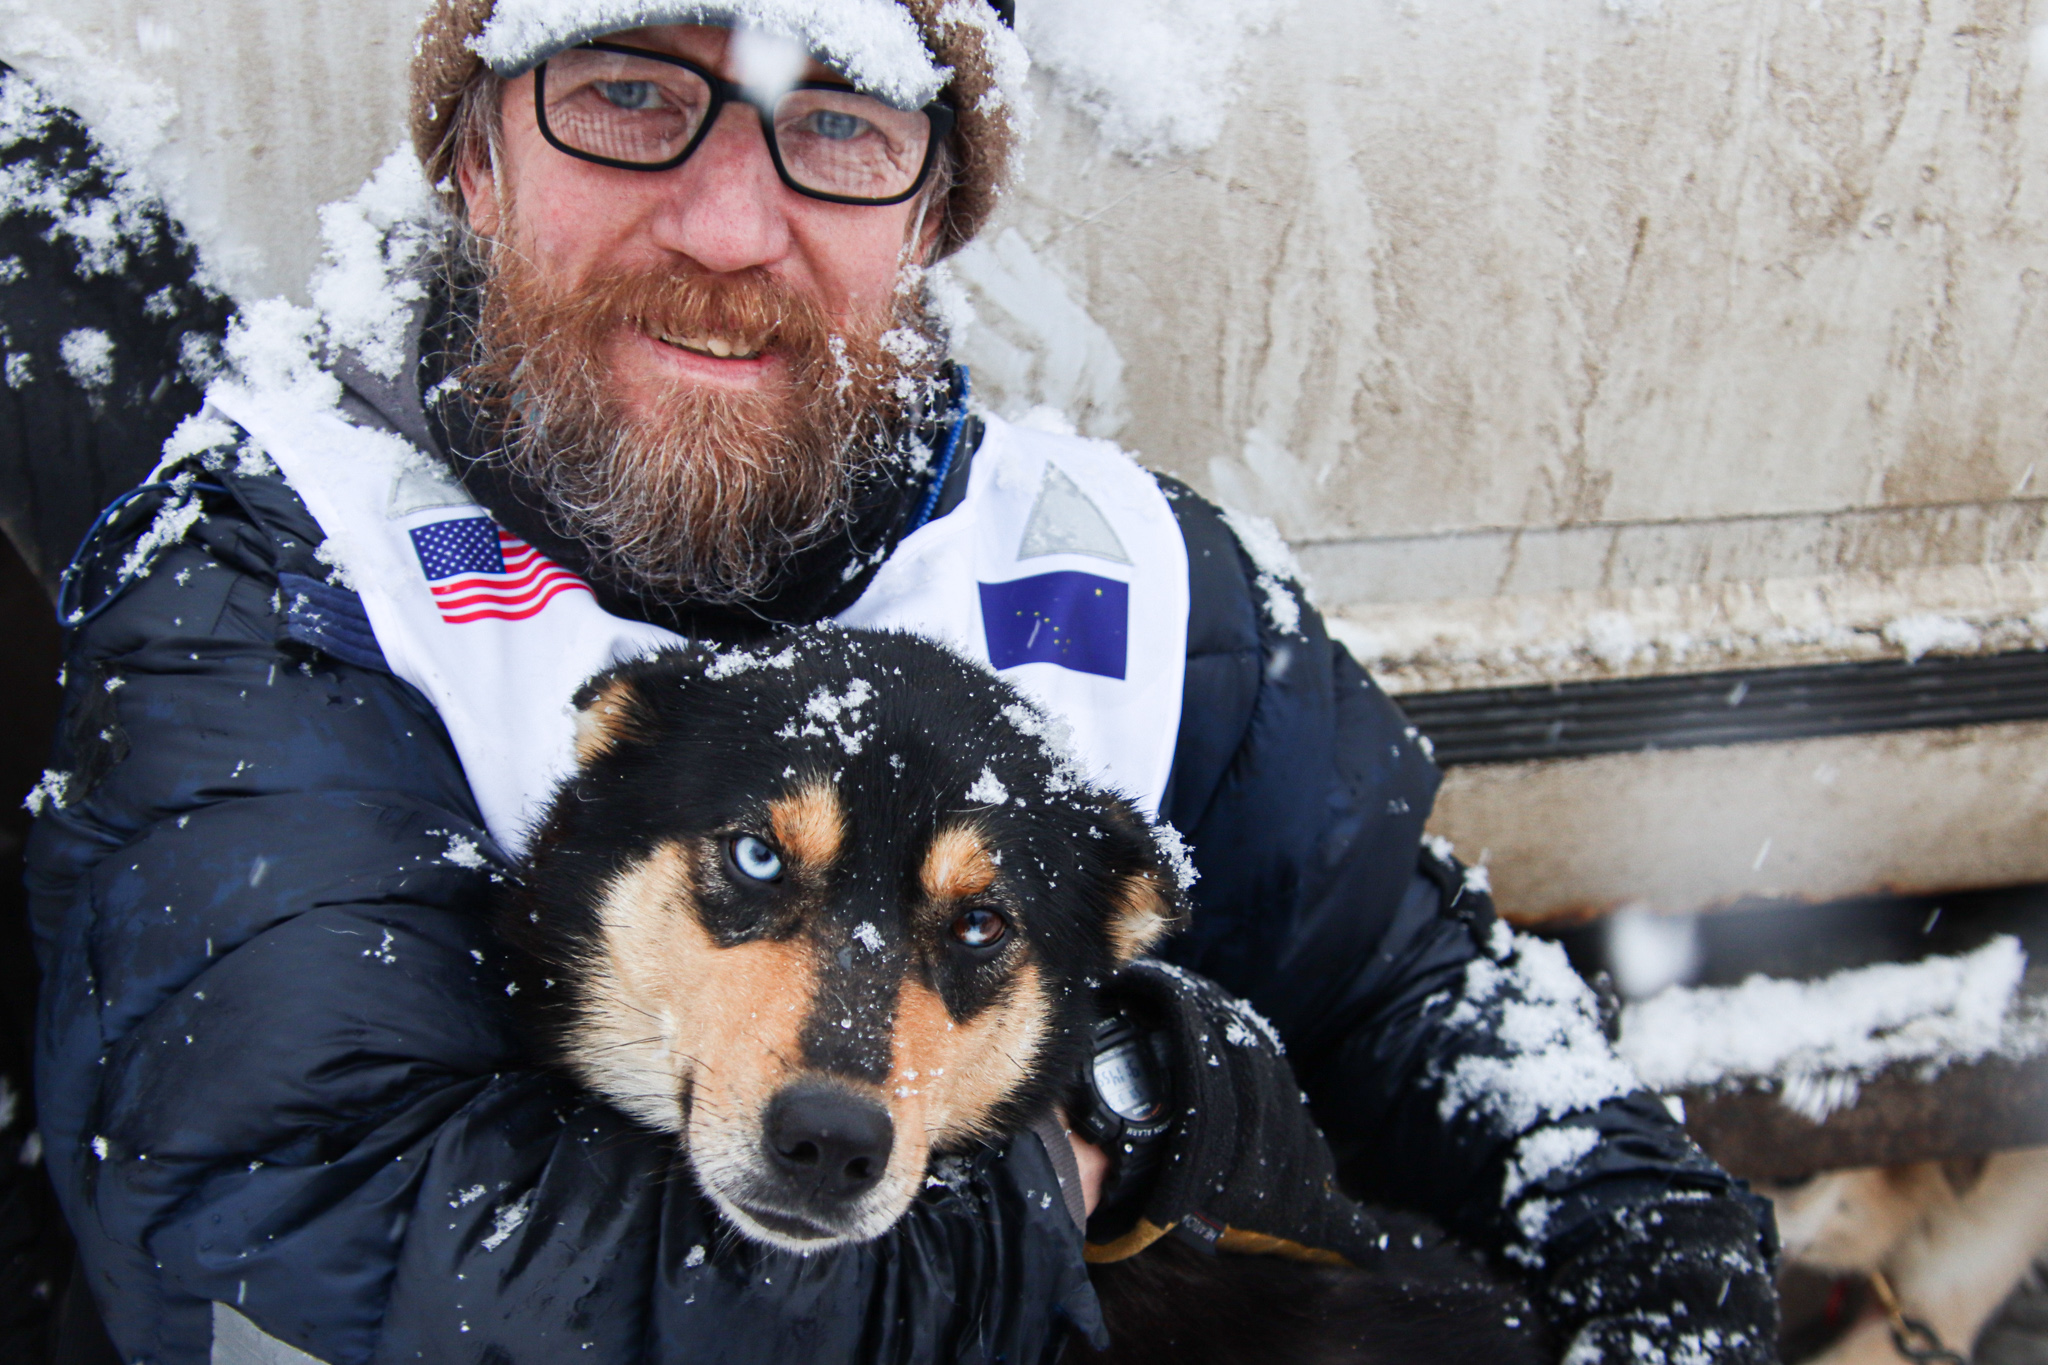 A white man with glasses and a beard holds a black and orangish dog